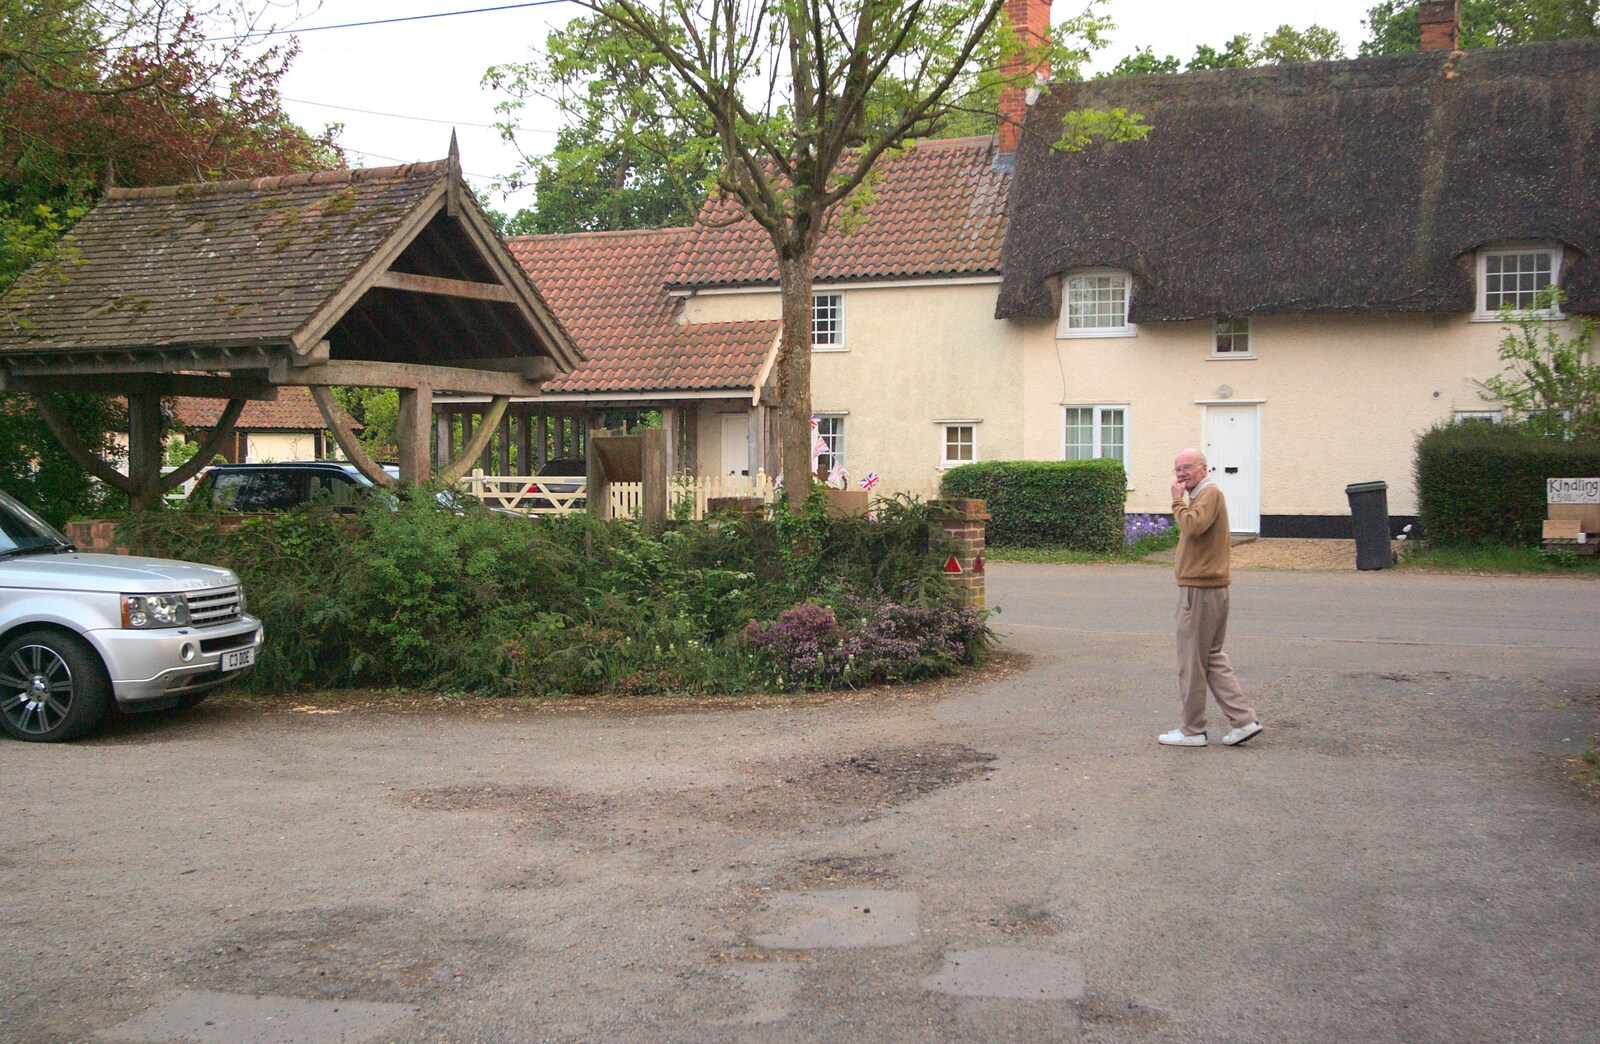 Grandad roams around outside from Charles and the Royal Wedding, Brome, Suffolk - 24th April 2011